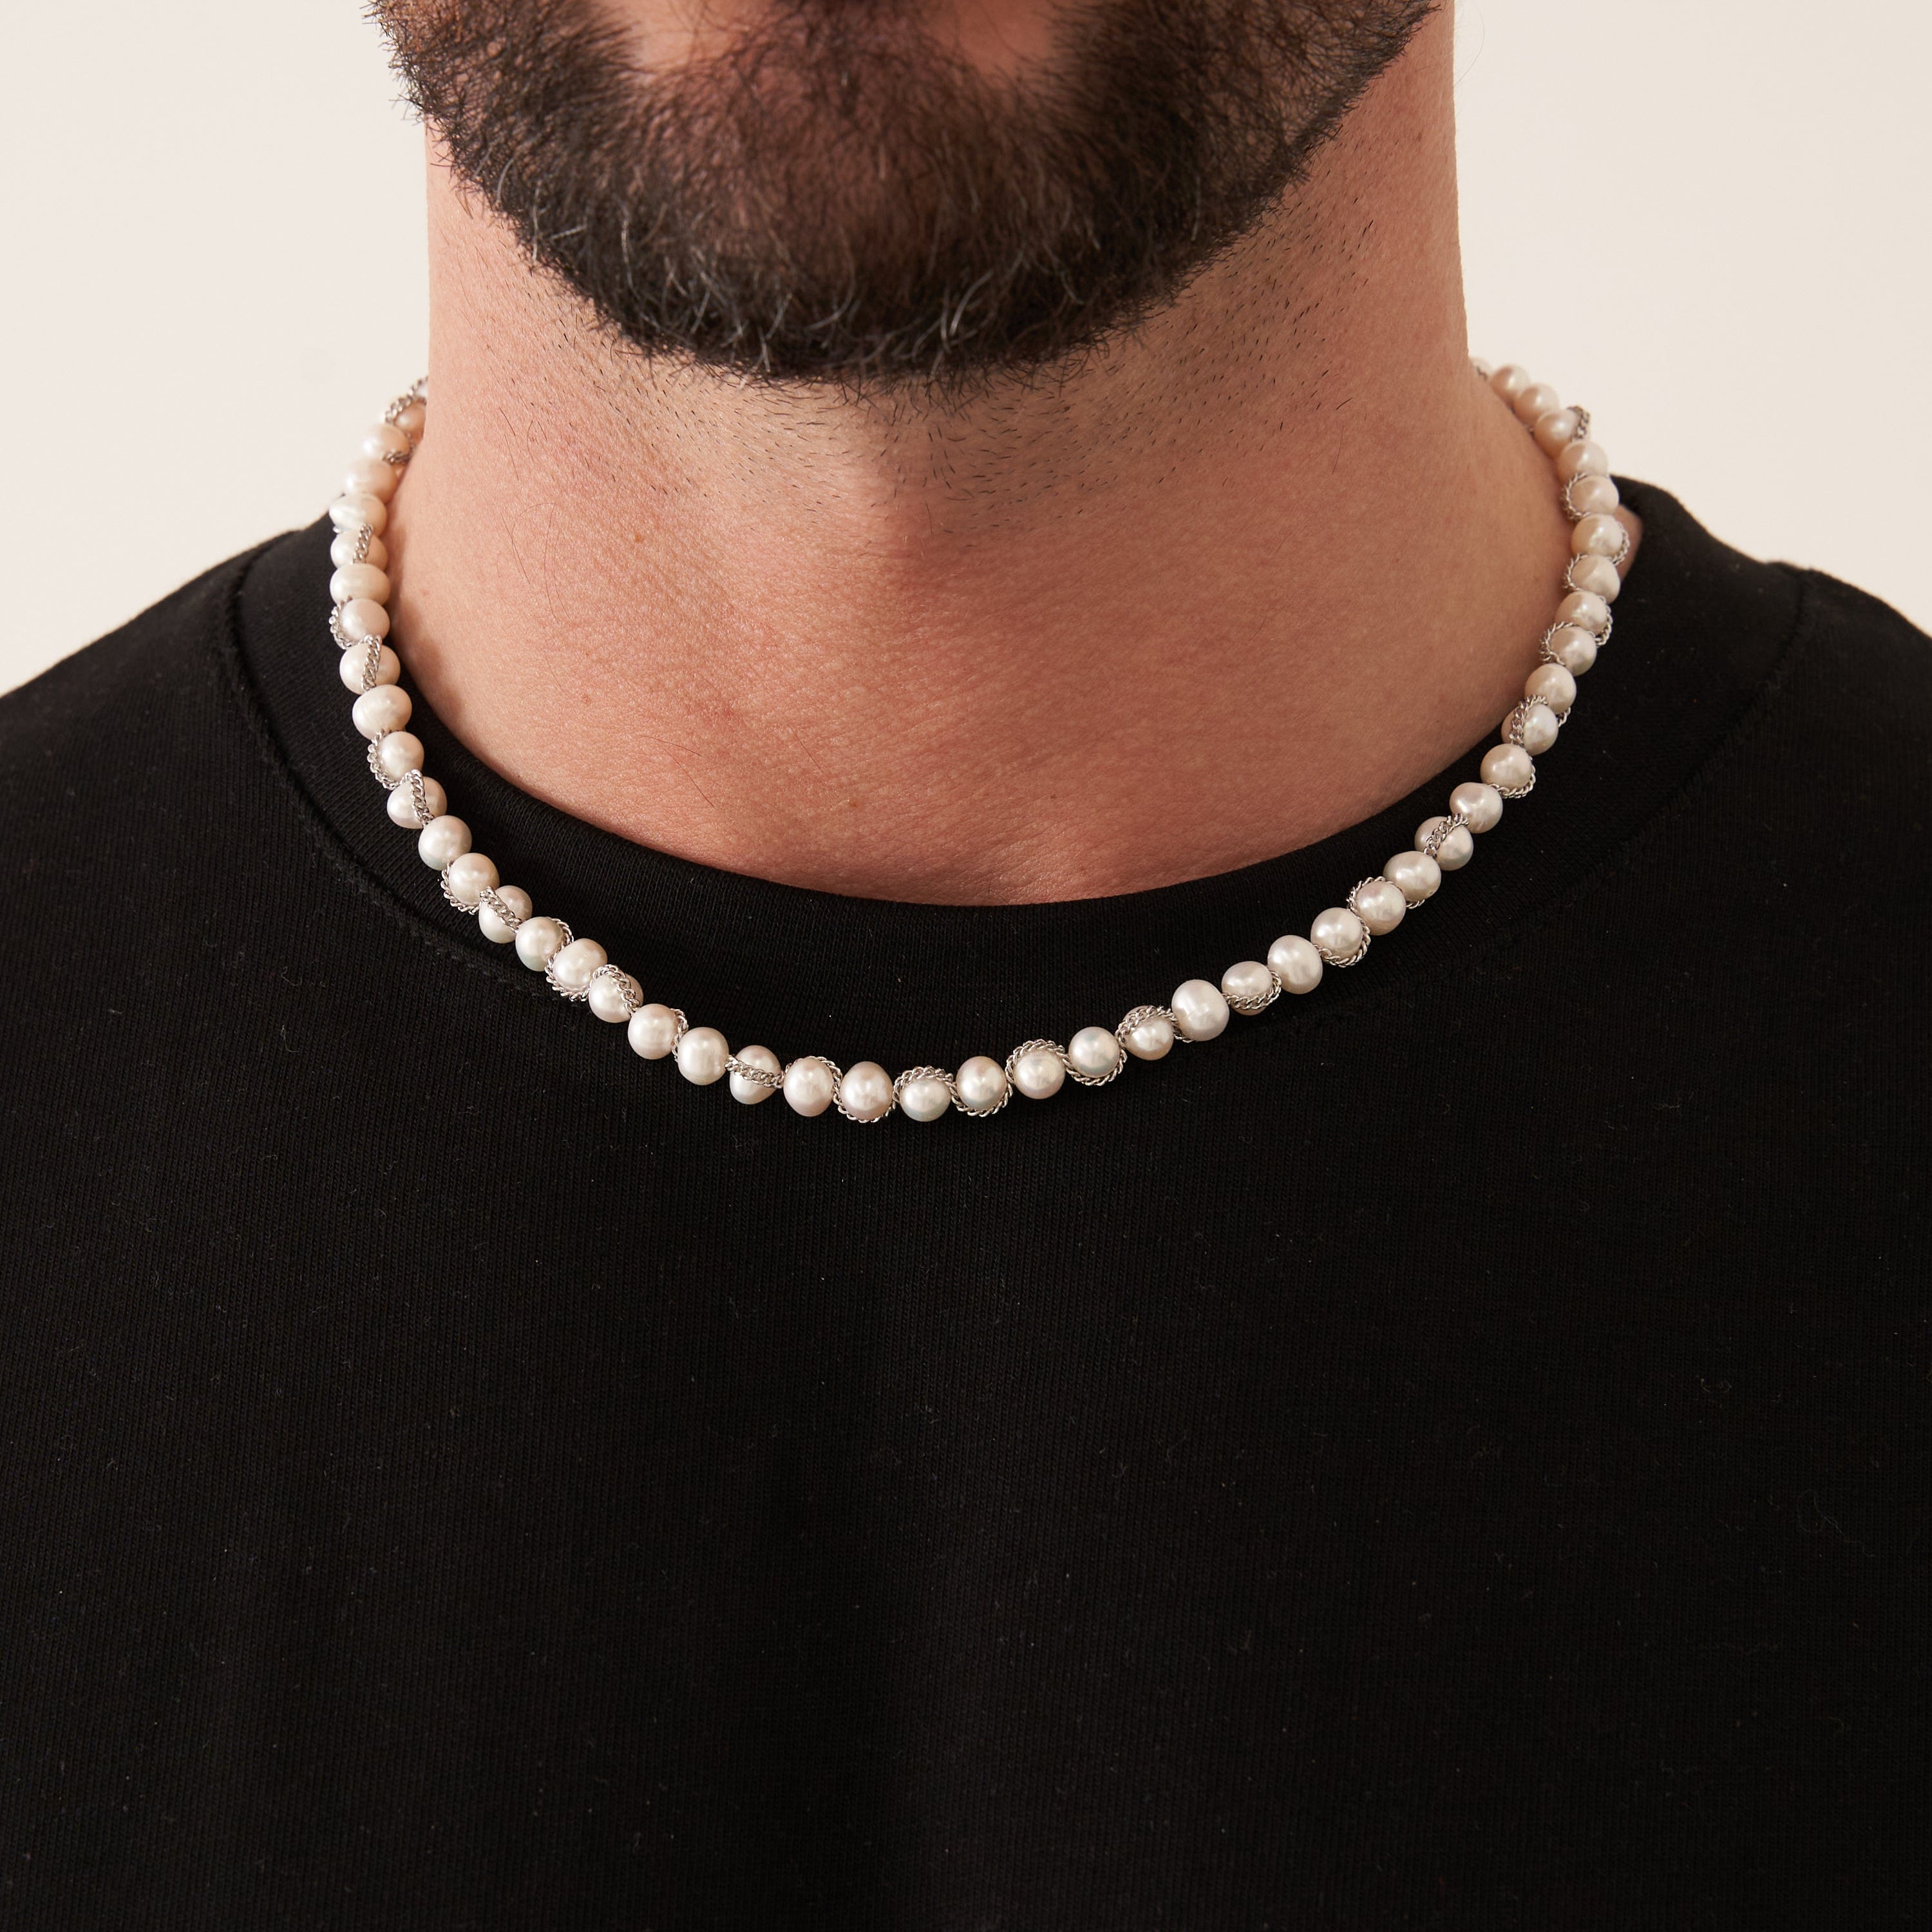 Chain Wrap Real Pearl Necklace (Silver)